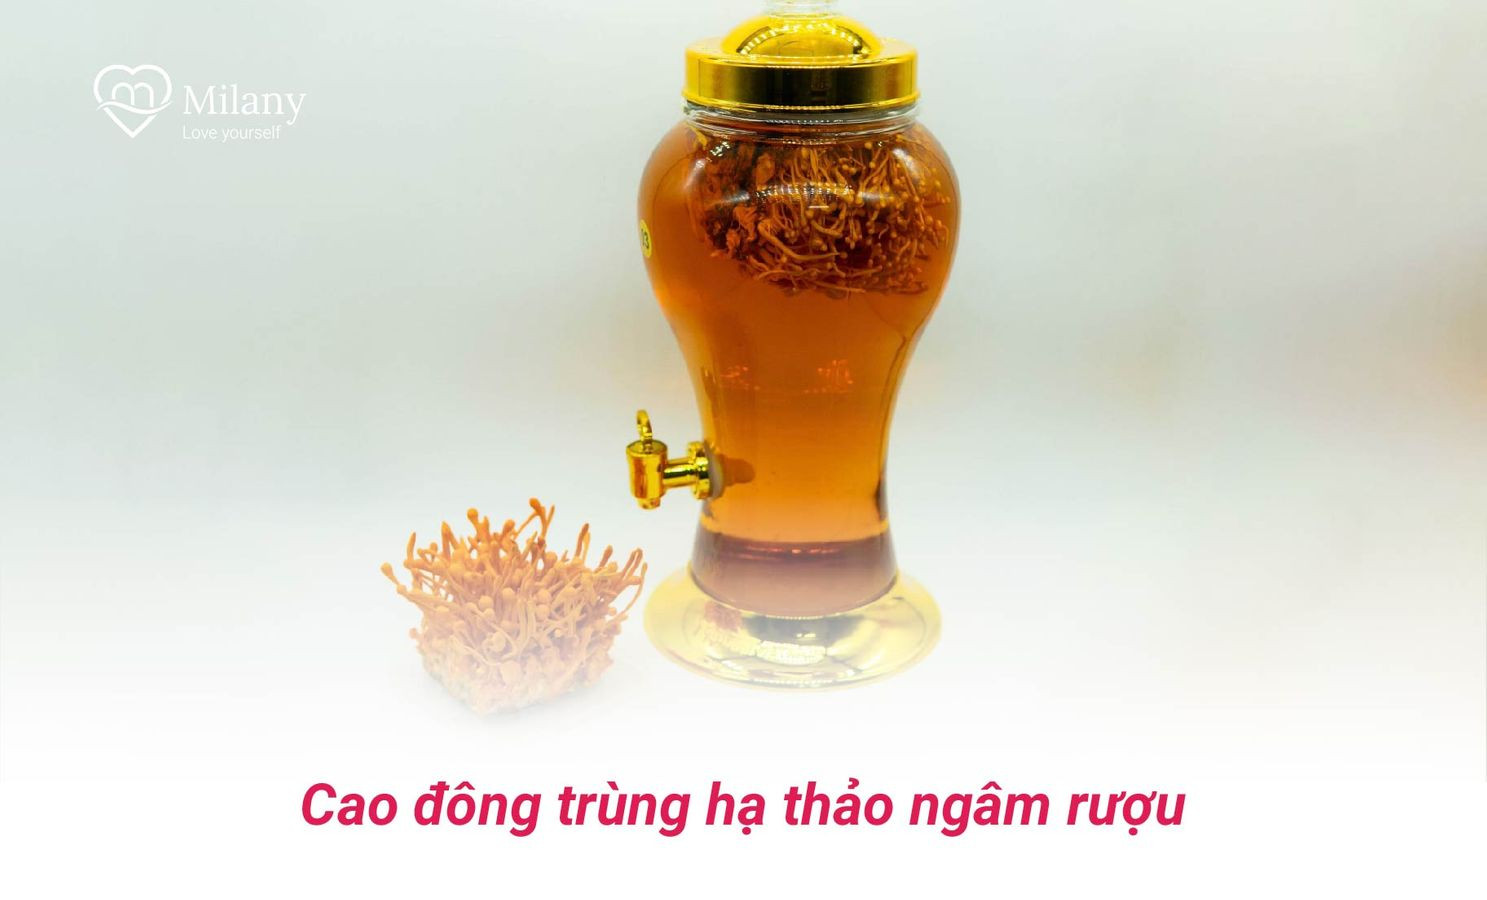 cao dong trung ha thao ngam ruou